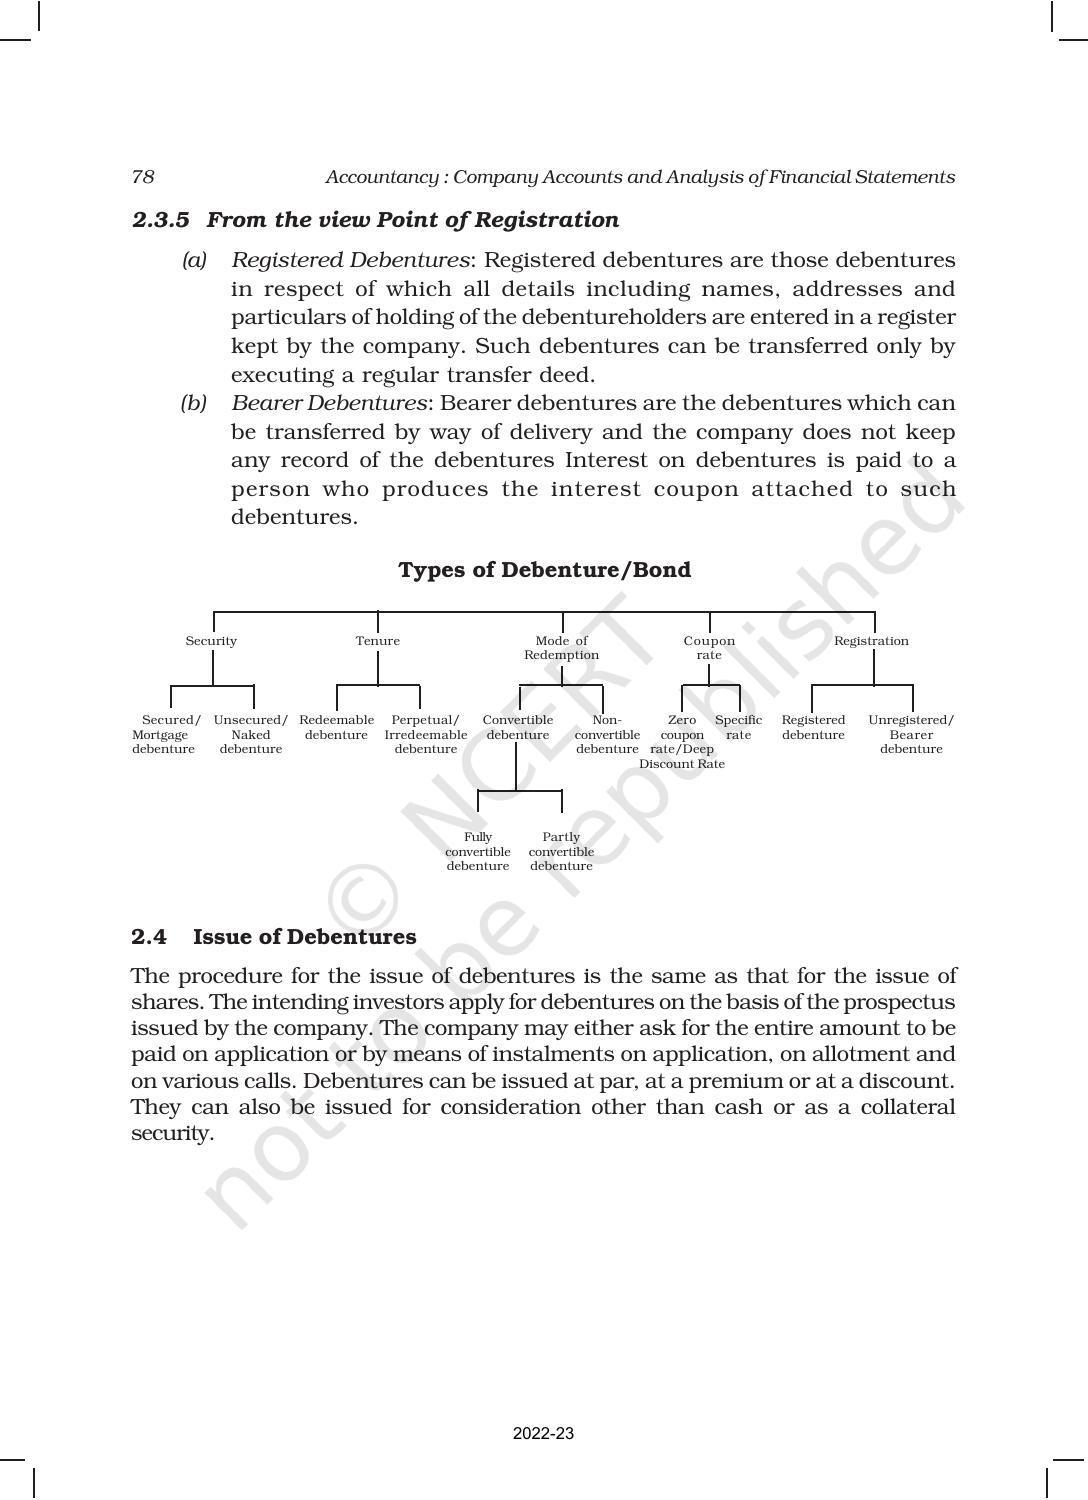 NCERT Book for Class 12 Accountancy Part II Chapter 1 Issue and Redemption of Debentures - Page 4